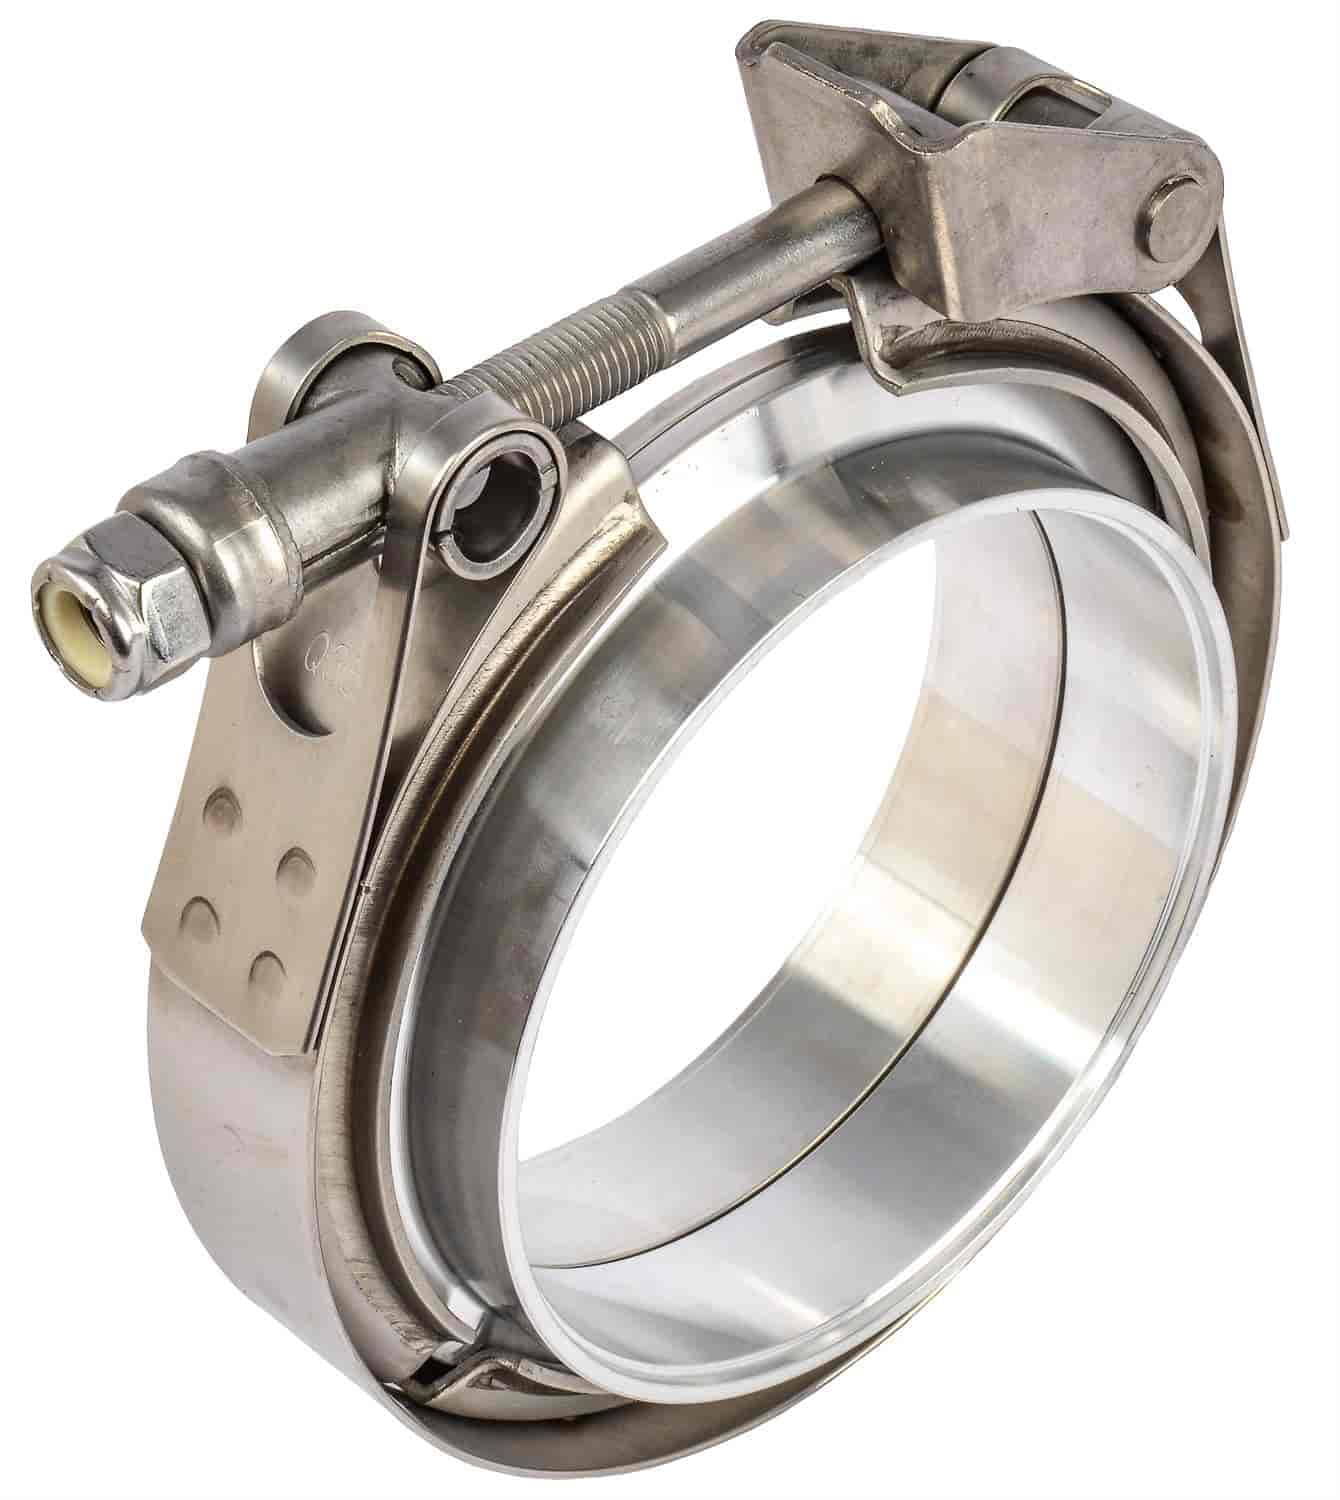 Verocious Motorsports 304 Stainless Steel V-Band Clamp Kit 4.5 Male/Female 